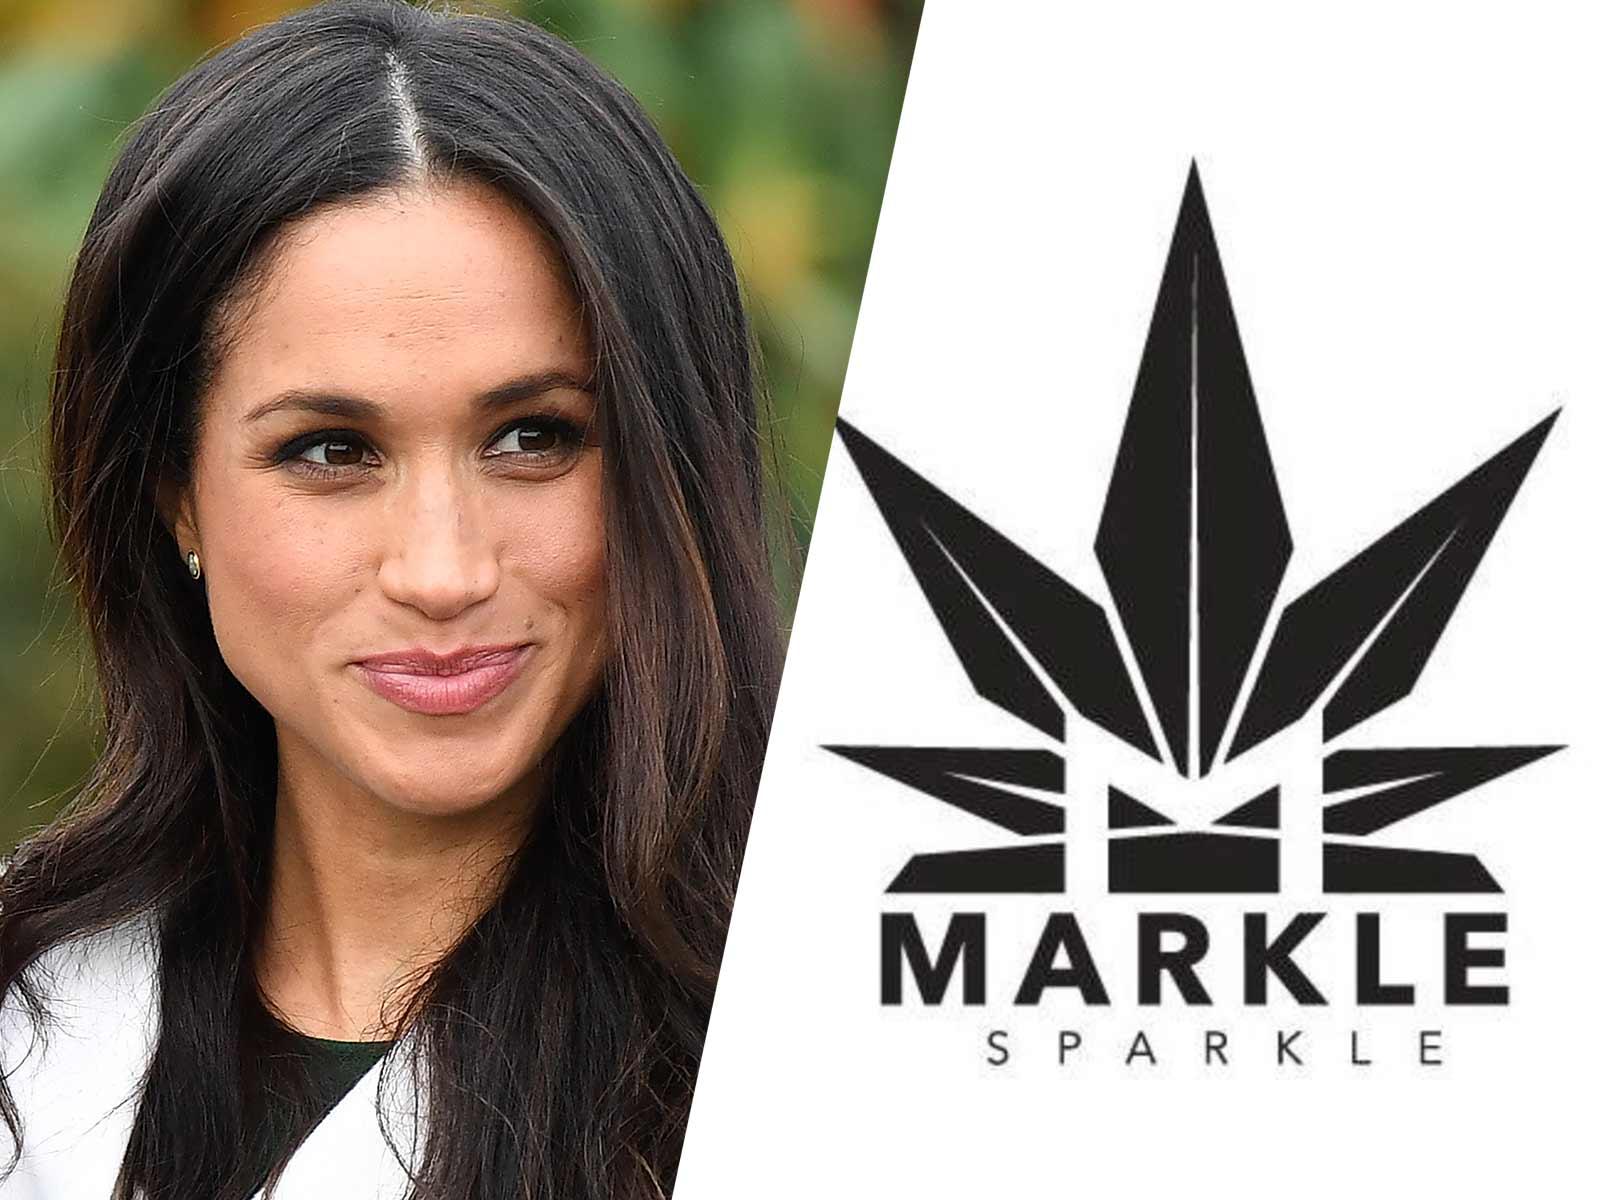 Non-Royals Looking to Spark a Profit Off Meghan Markle’s ‘Sparkle’